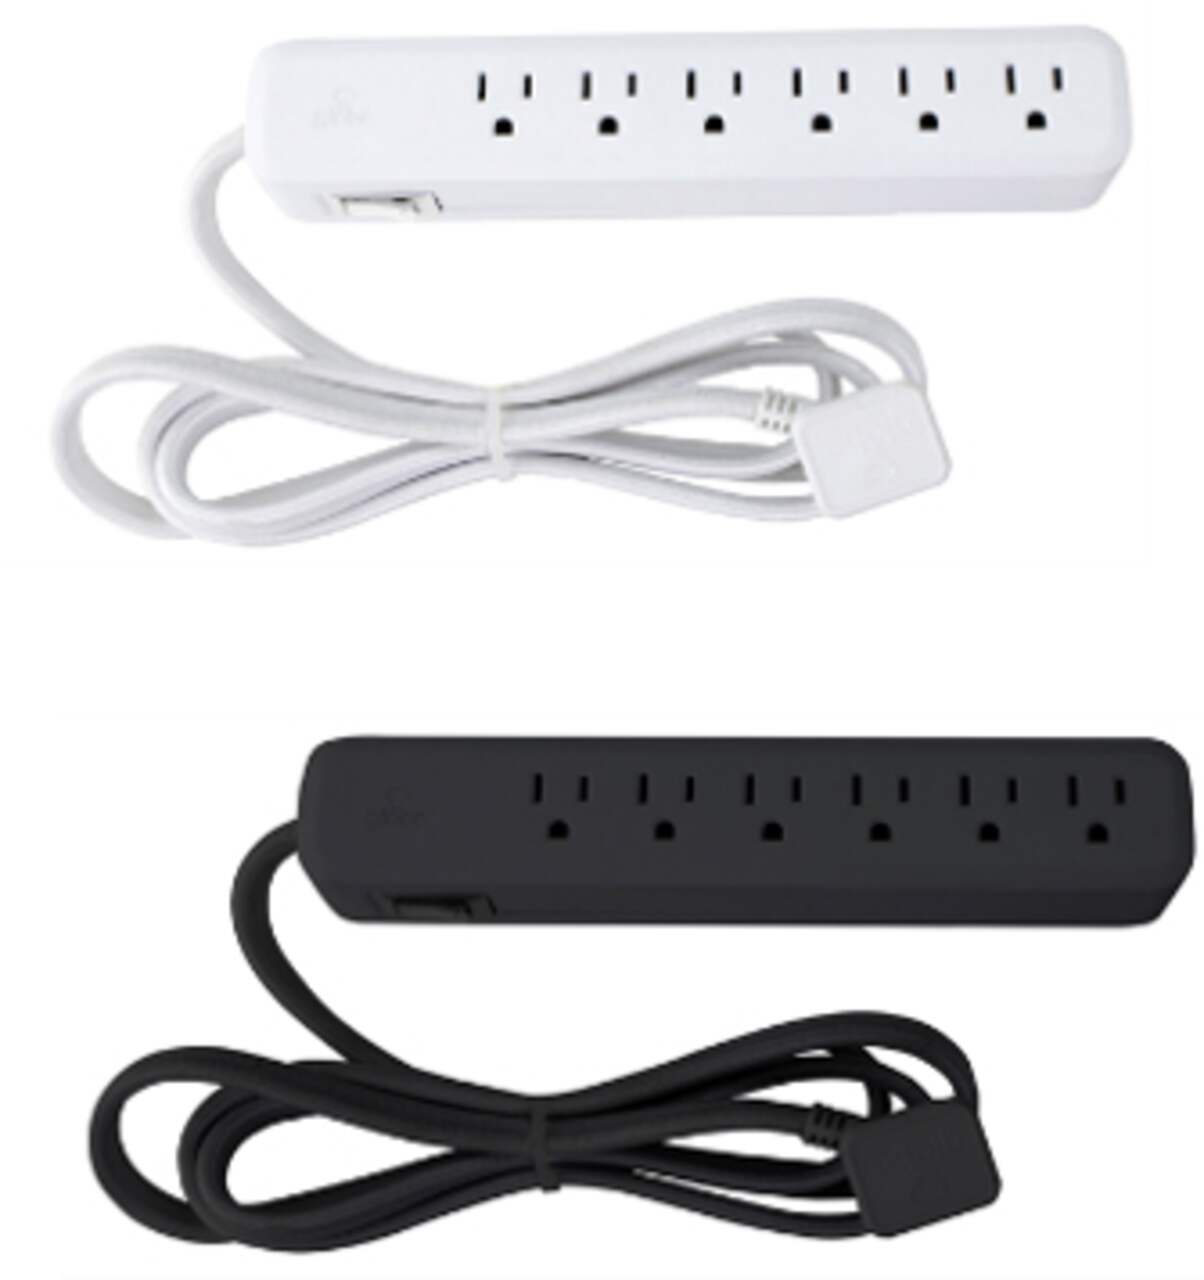 2.5ft Extension Cord w/ 6 Outlet Power Strip White